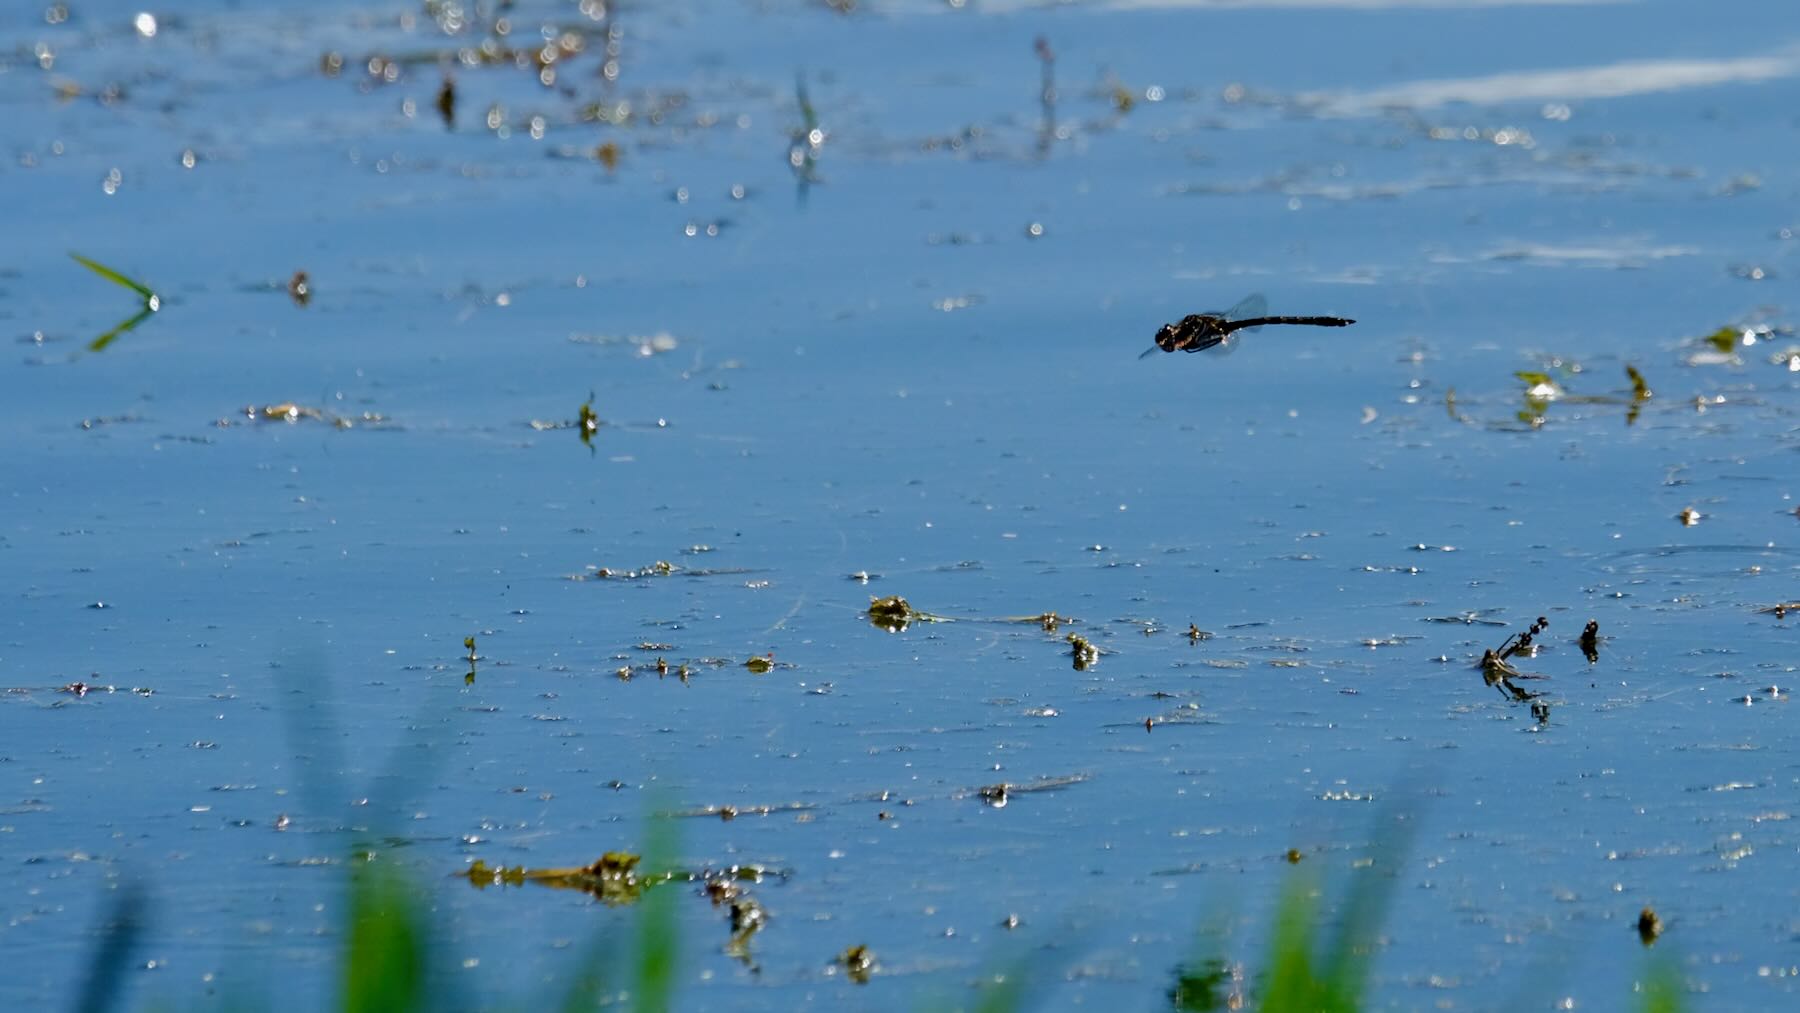 Dragonfly in flight above a lake. 